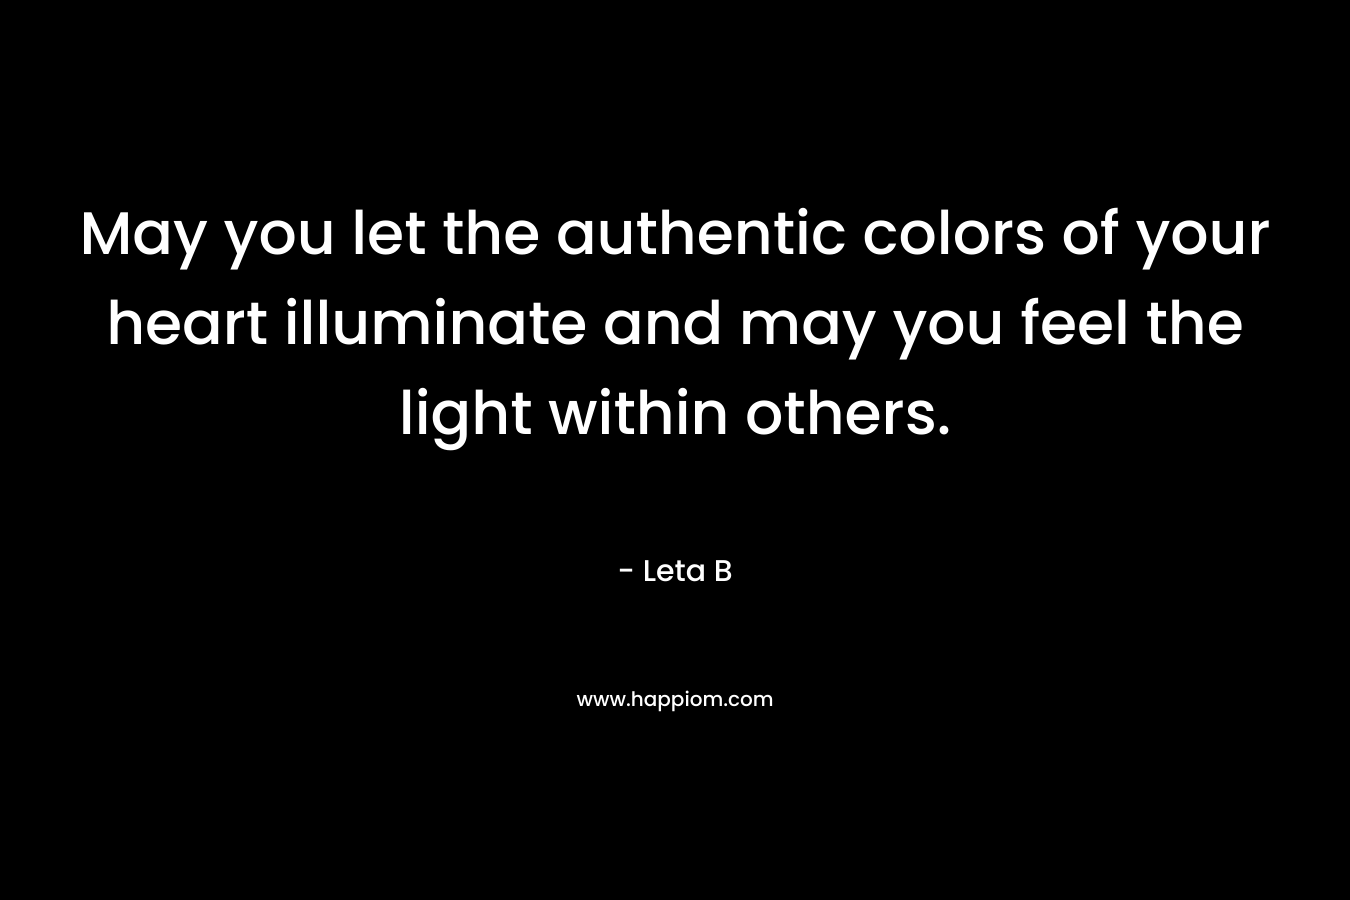 May you let the authentic colors of your heart illuminate and may you feel the light within others.